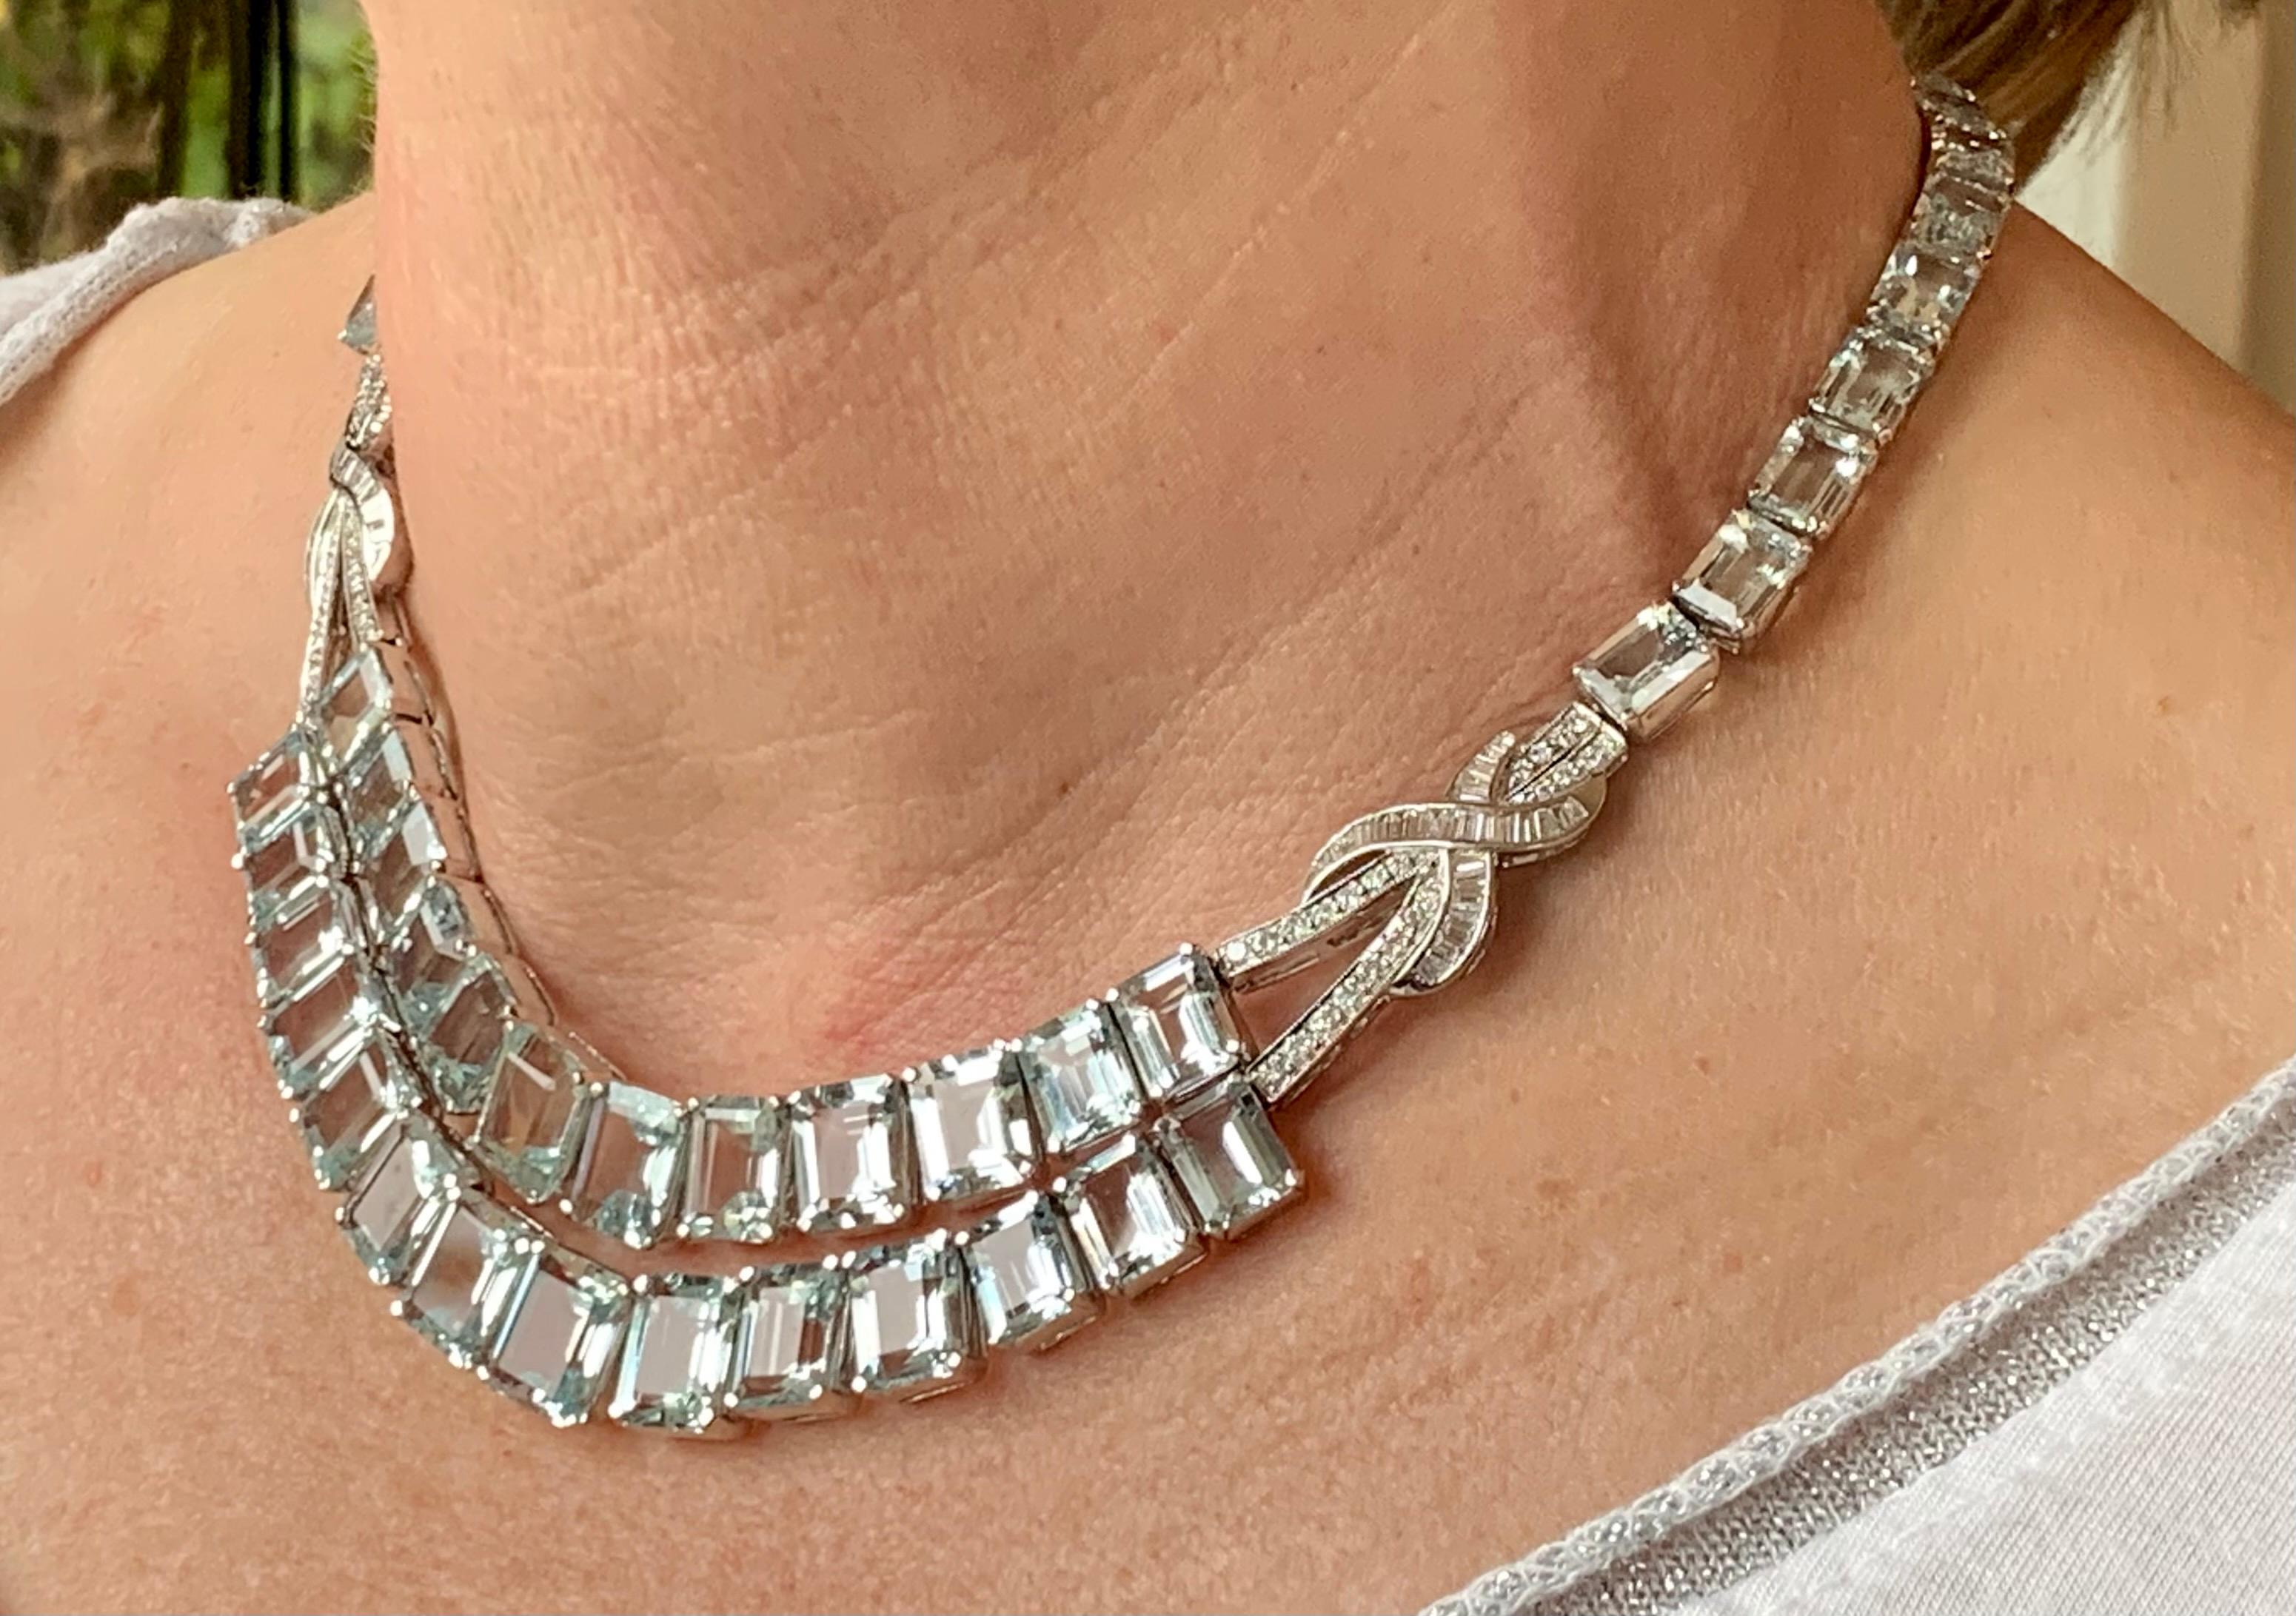 18 K white Gold Vintage necklace, set with 55 Aquamarines with a total weight of 158.60 ct and Diamonds weighing 2.48 ct. 
Length: 39 cm
Authenticity and money back is guaranteed. For any enquires, please contact the seller through the message